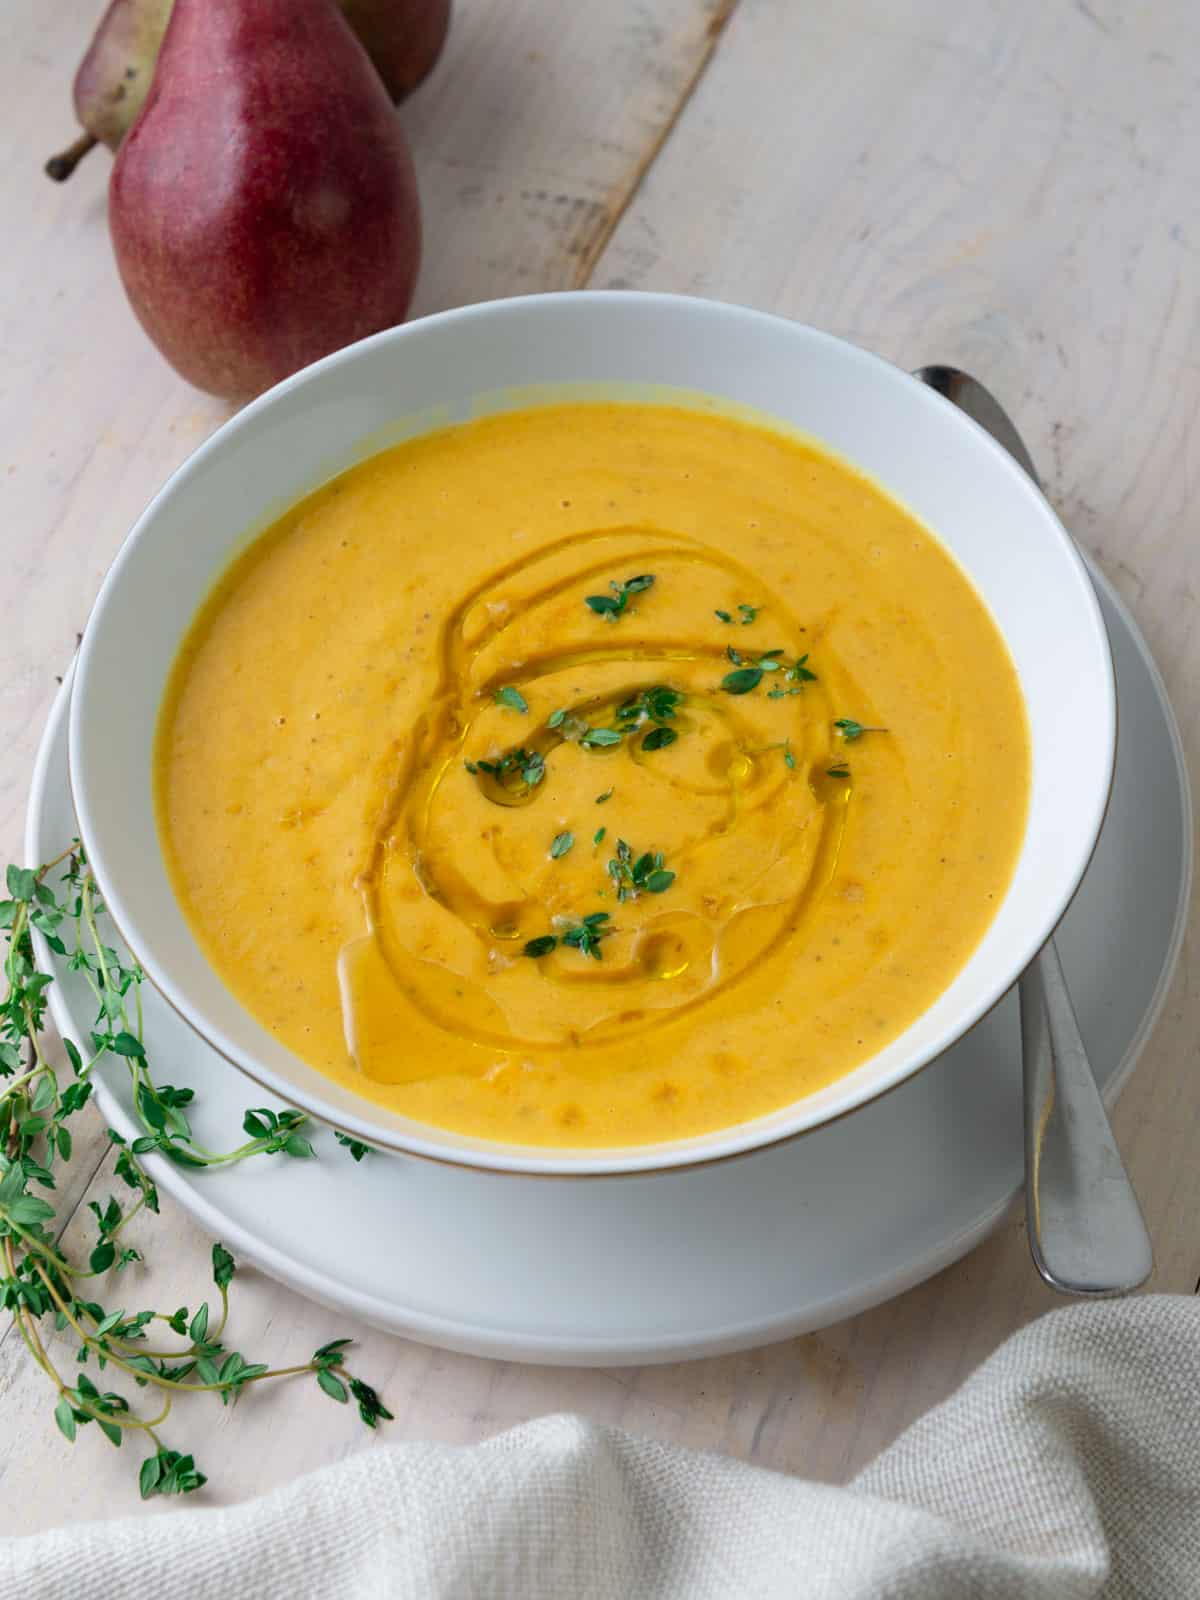 Creamy pear and roasted butternut squash soup topped with fresh thyme.